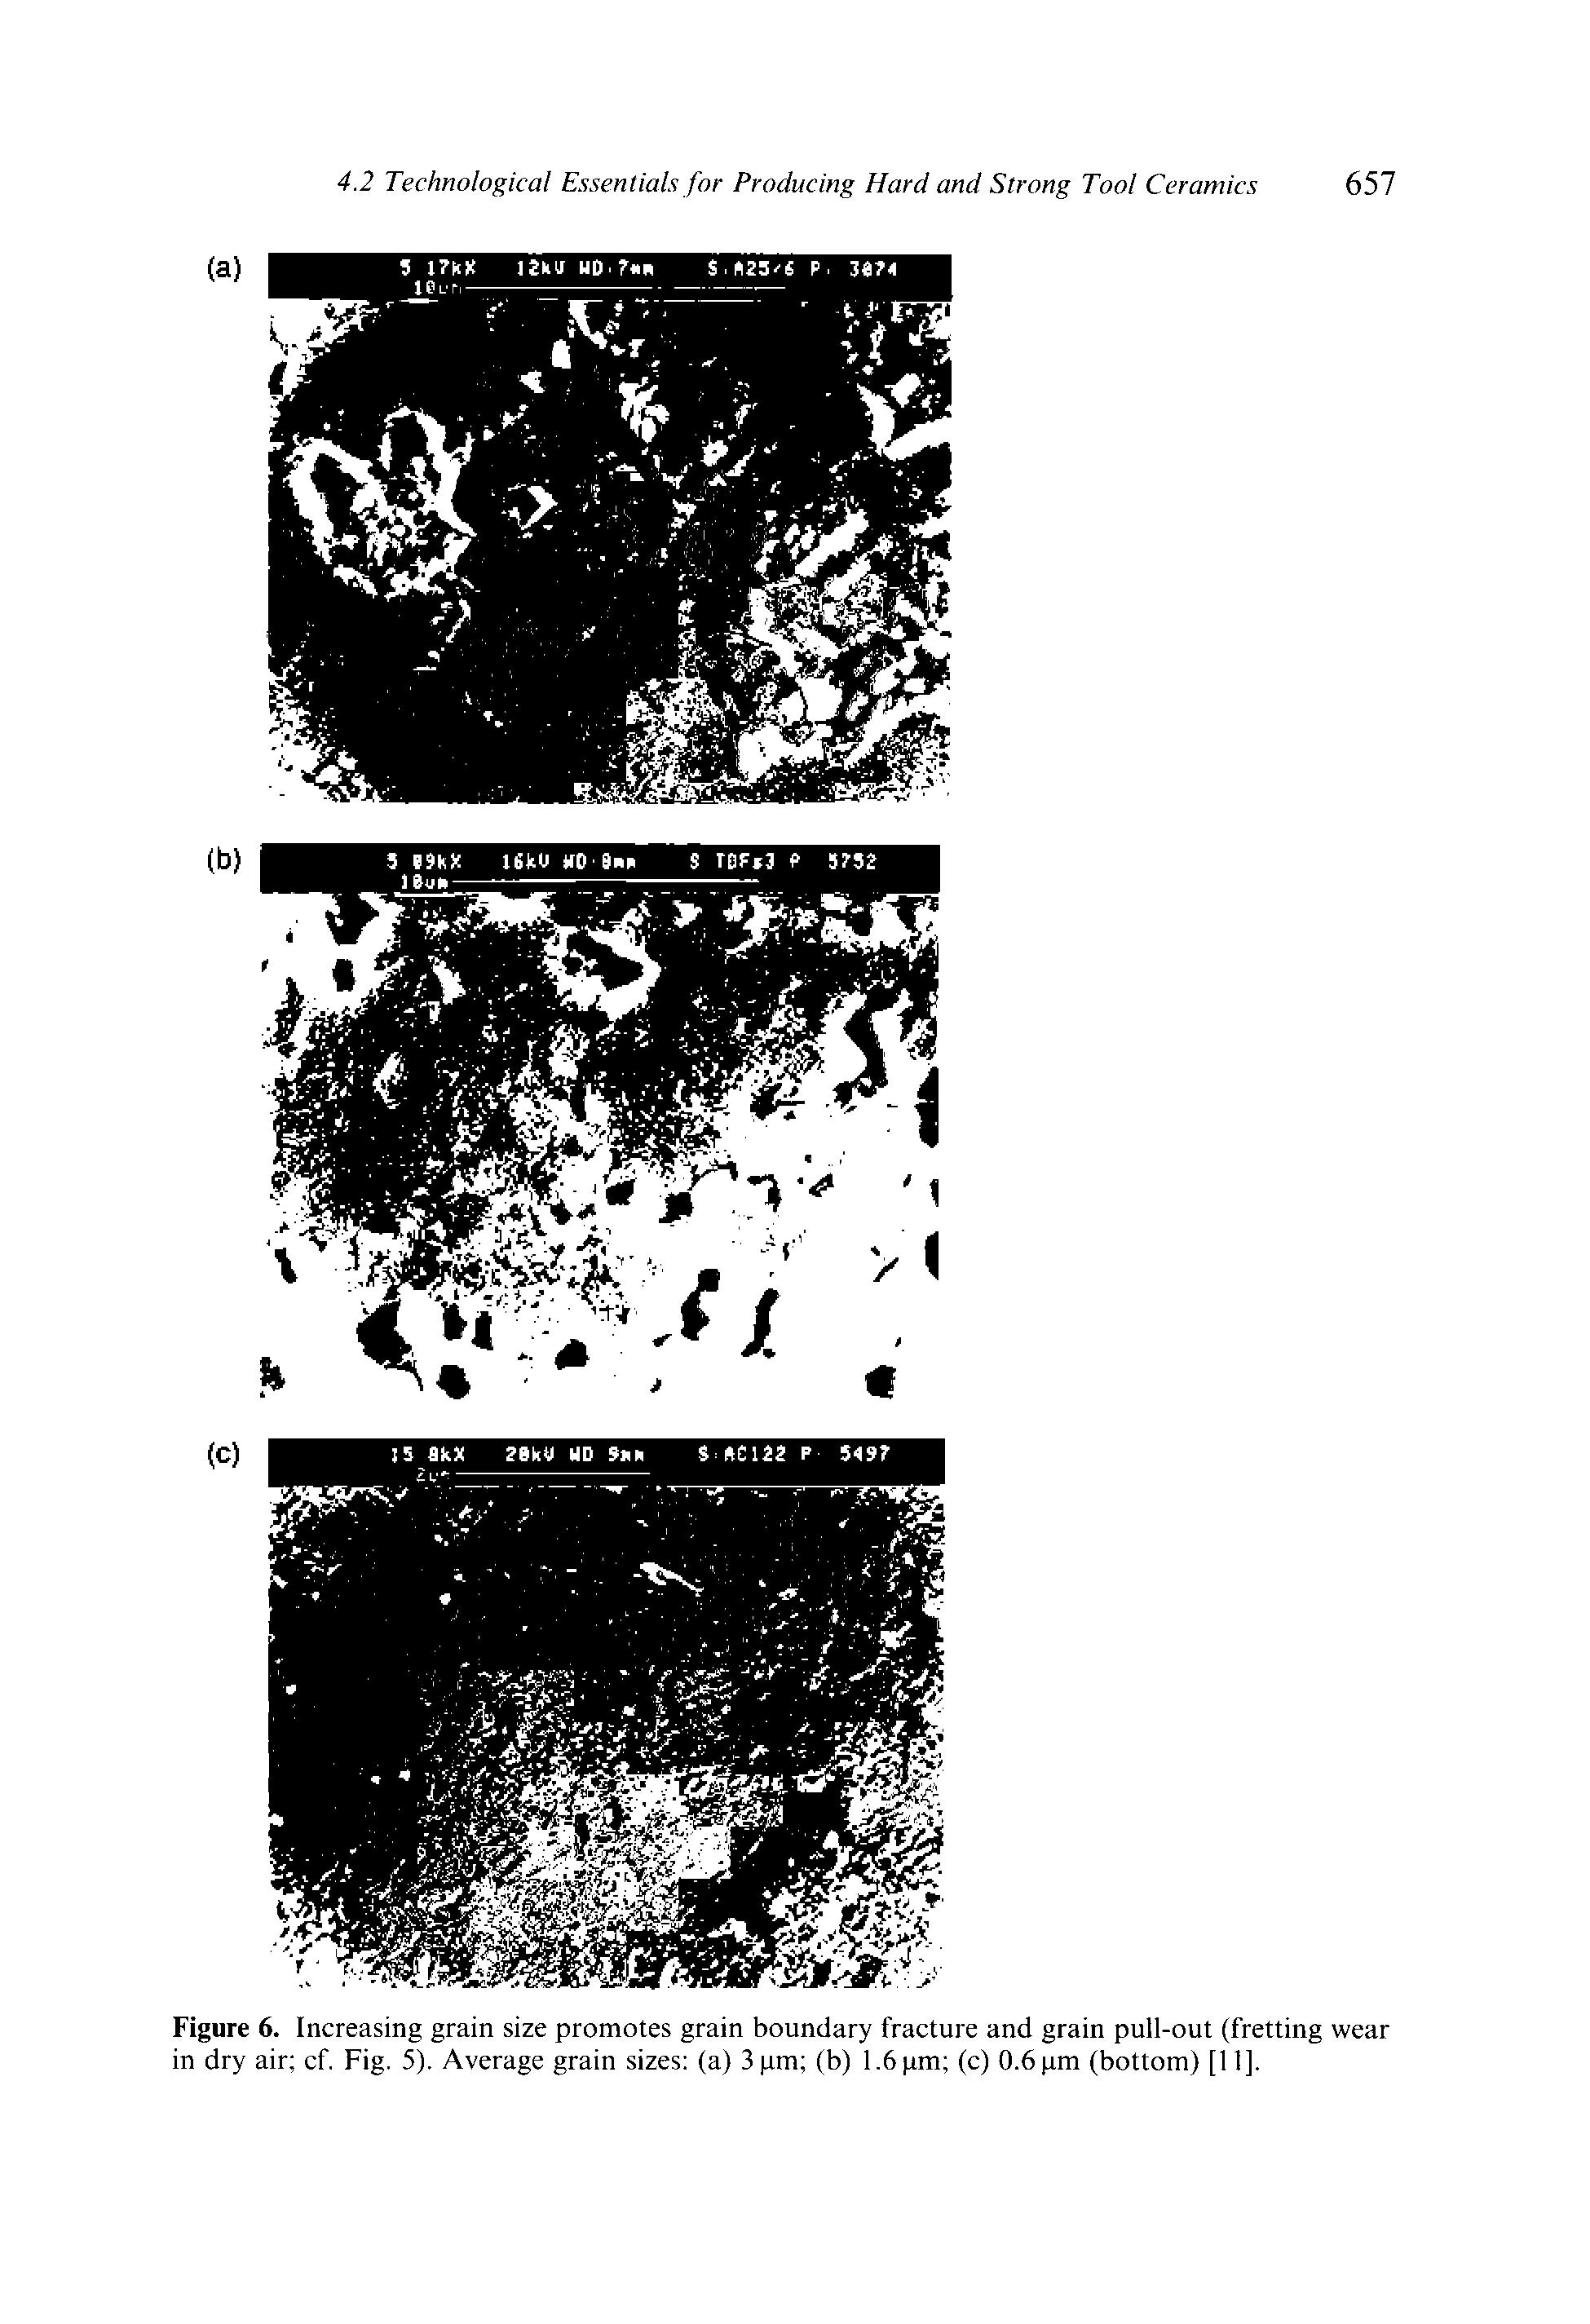 Figure 6. Increasing grain size promotes grain boundary fracture and grain pull-out (fretting wear in dry air cf. Fig. 5). Average grain sizes (a) 3 pm (b) 1.6 pm (c) 0.6 pm (bottom) [11].